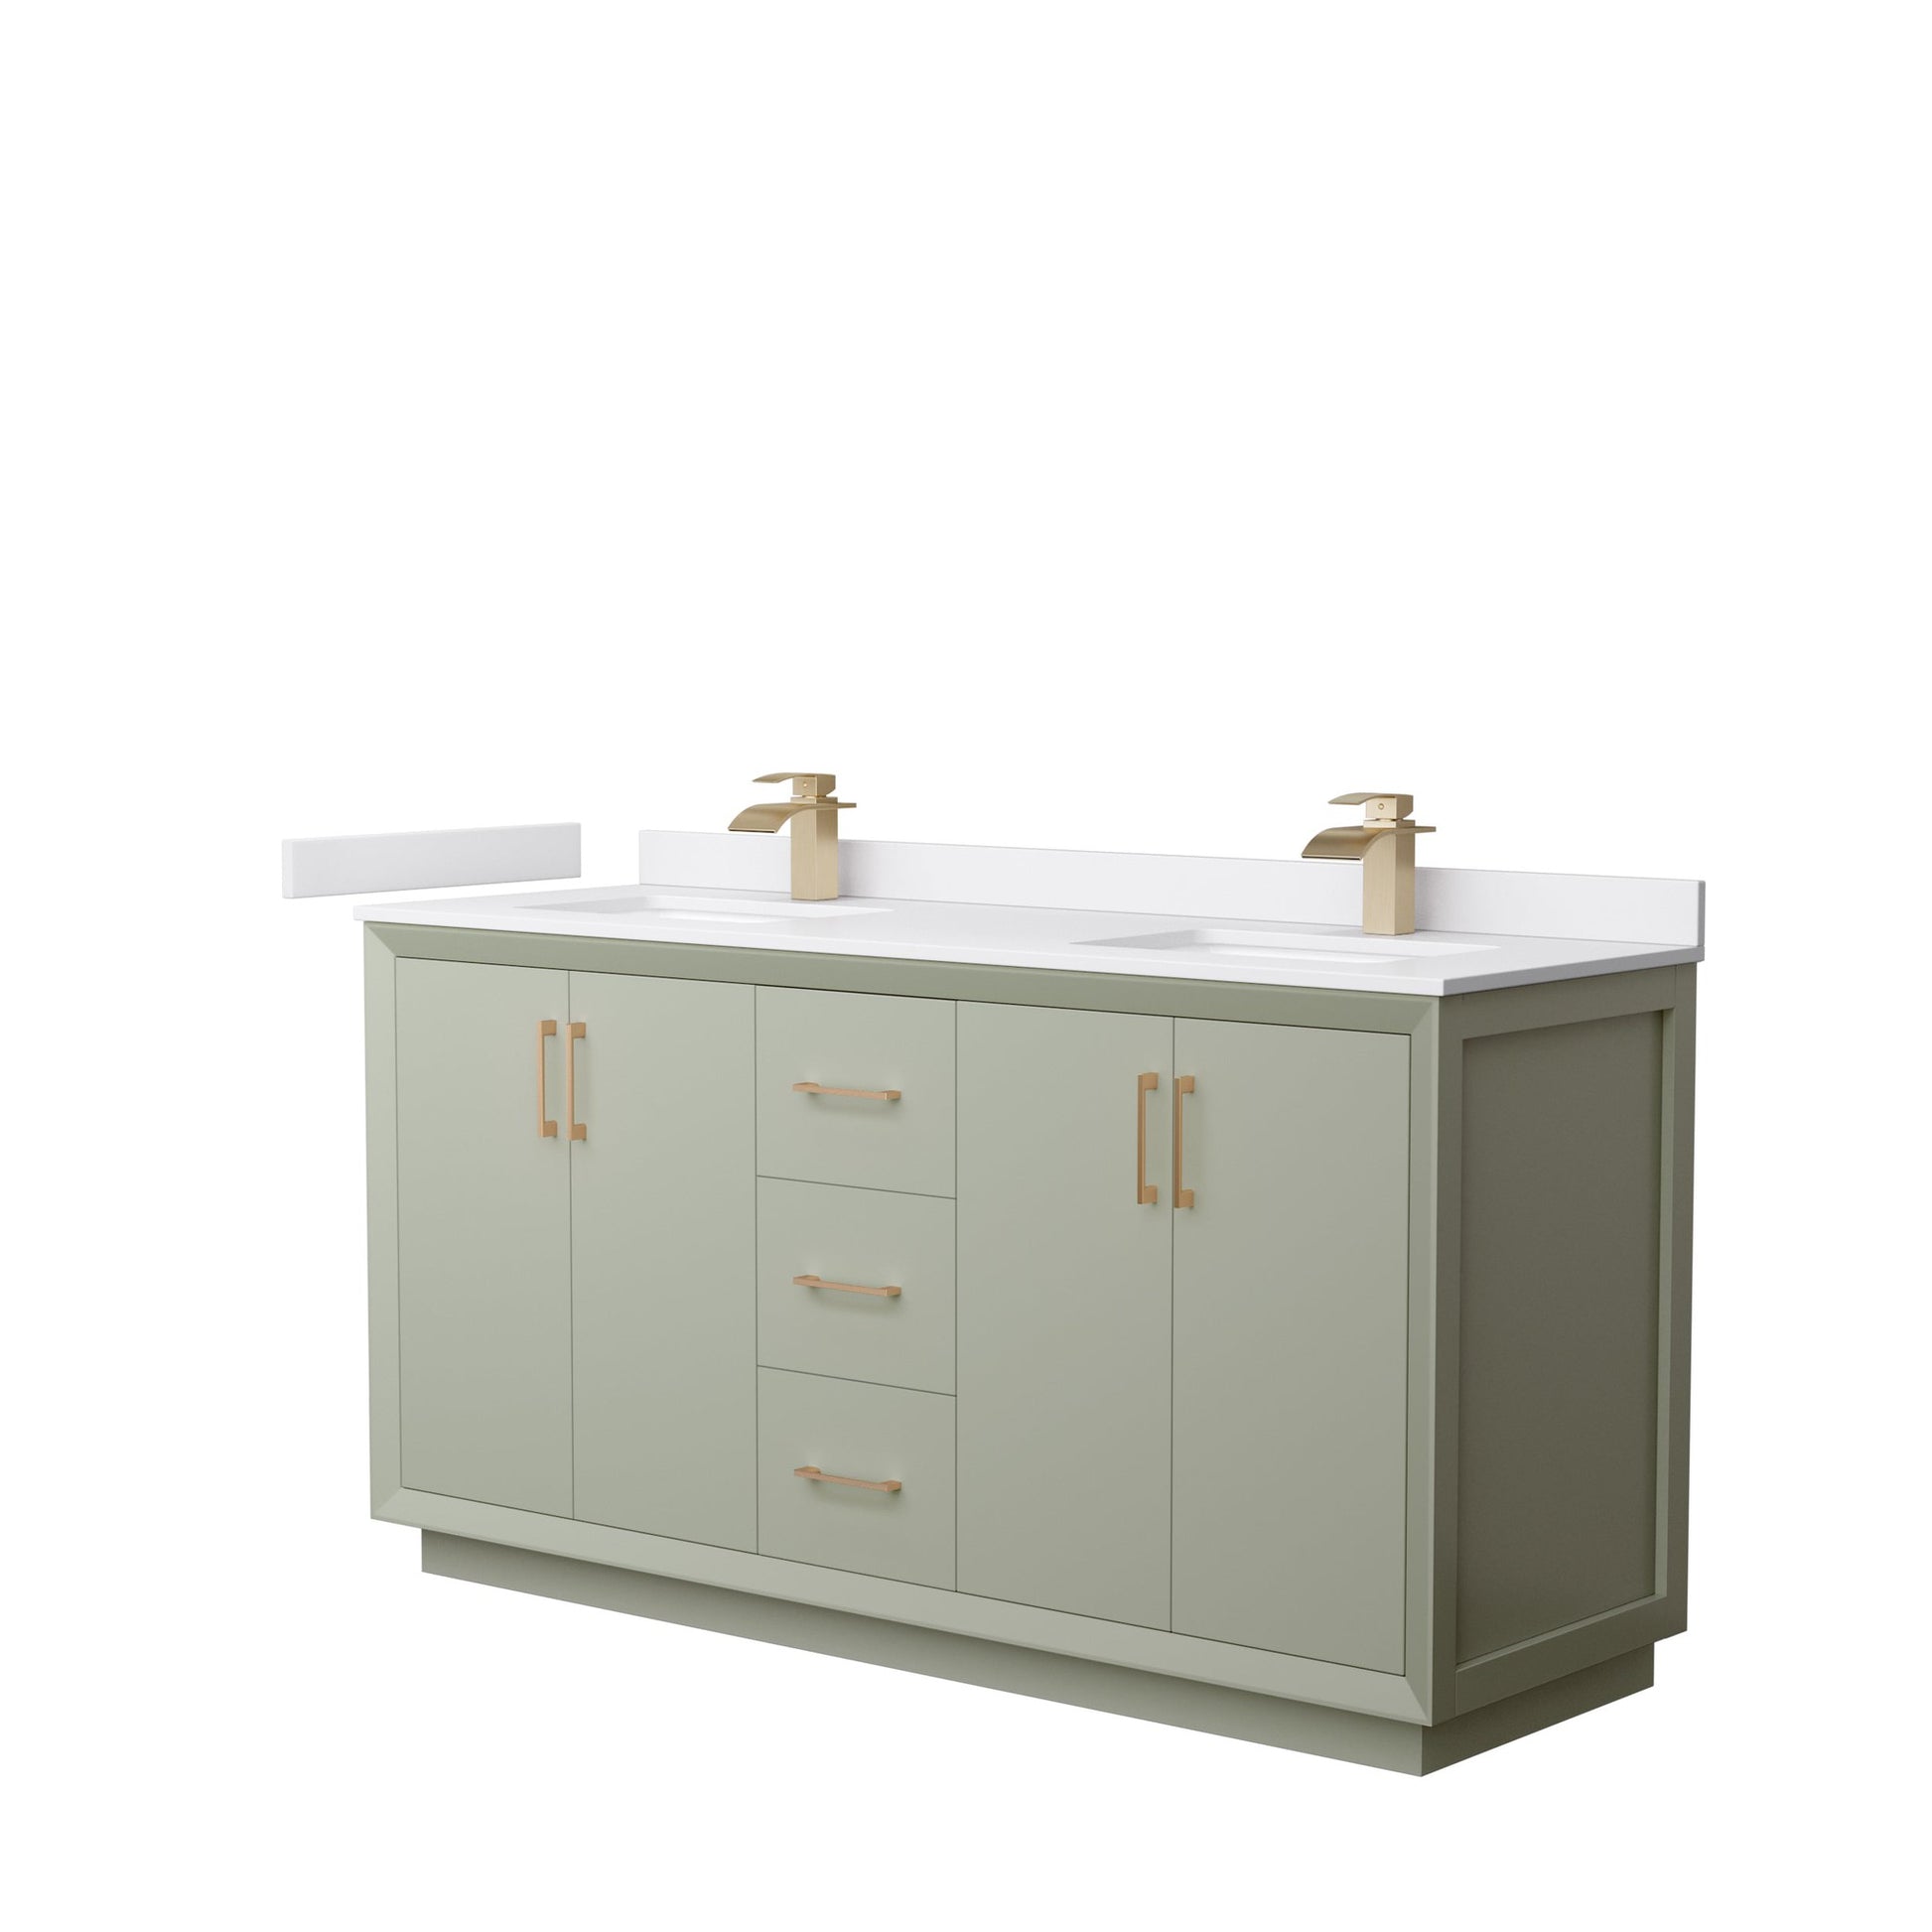 Wyndham Collection Strada 66" Double Bathroom Vanity in Light Green, White Cultured Marble Countertop, Undermount Square Sinks, Satin Bronze Trim